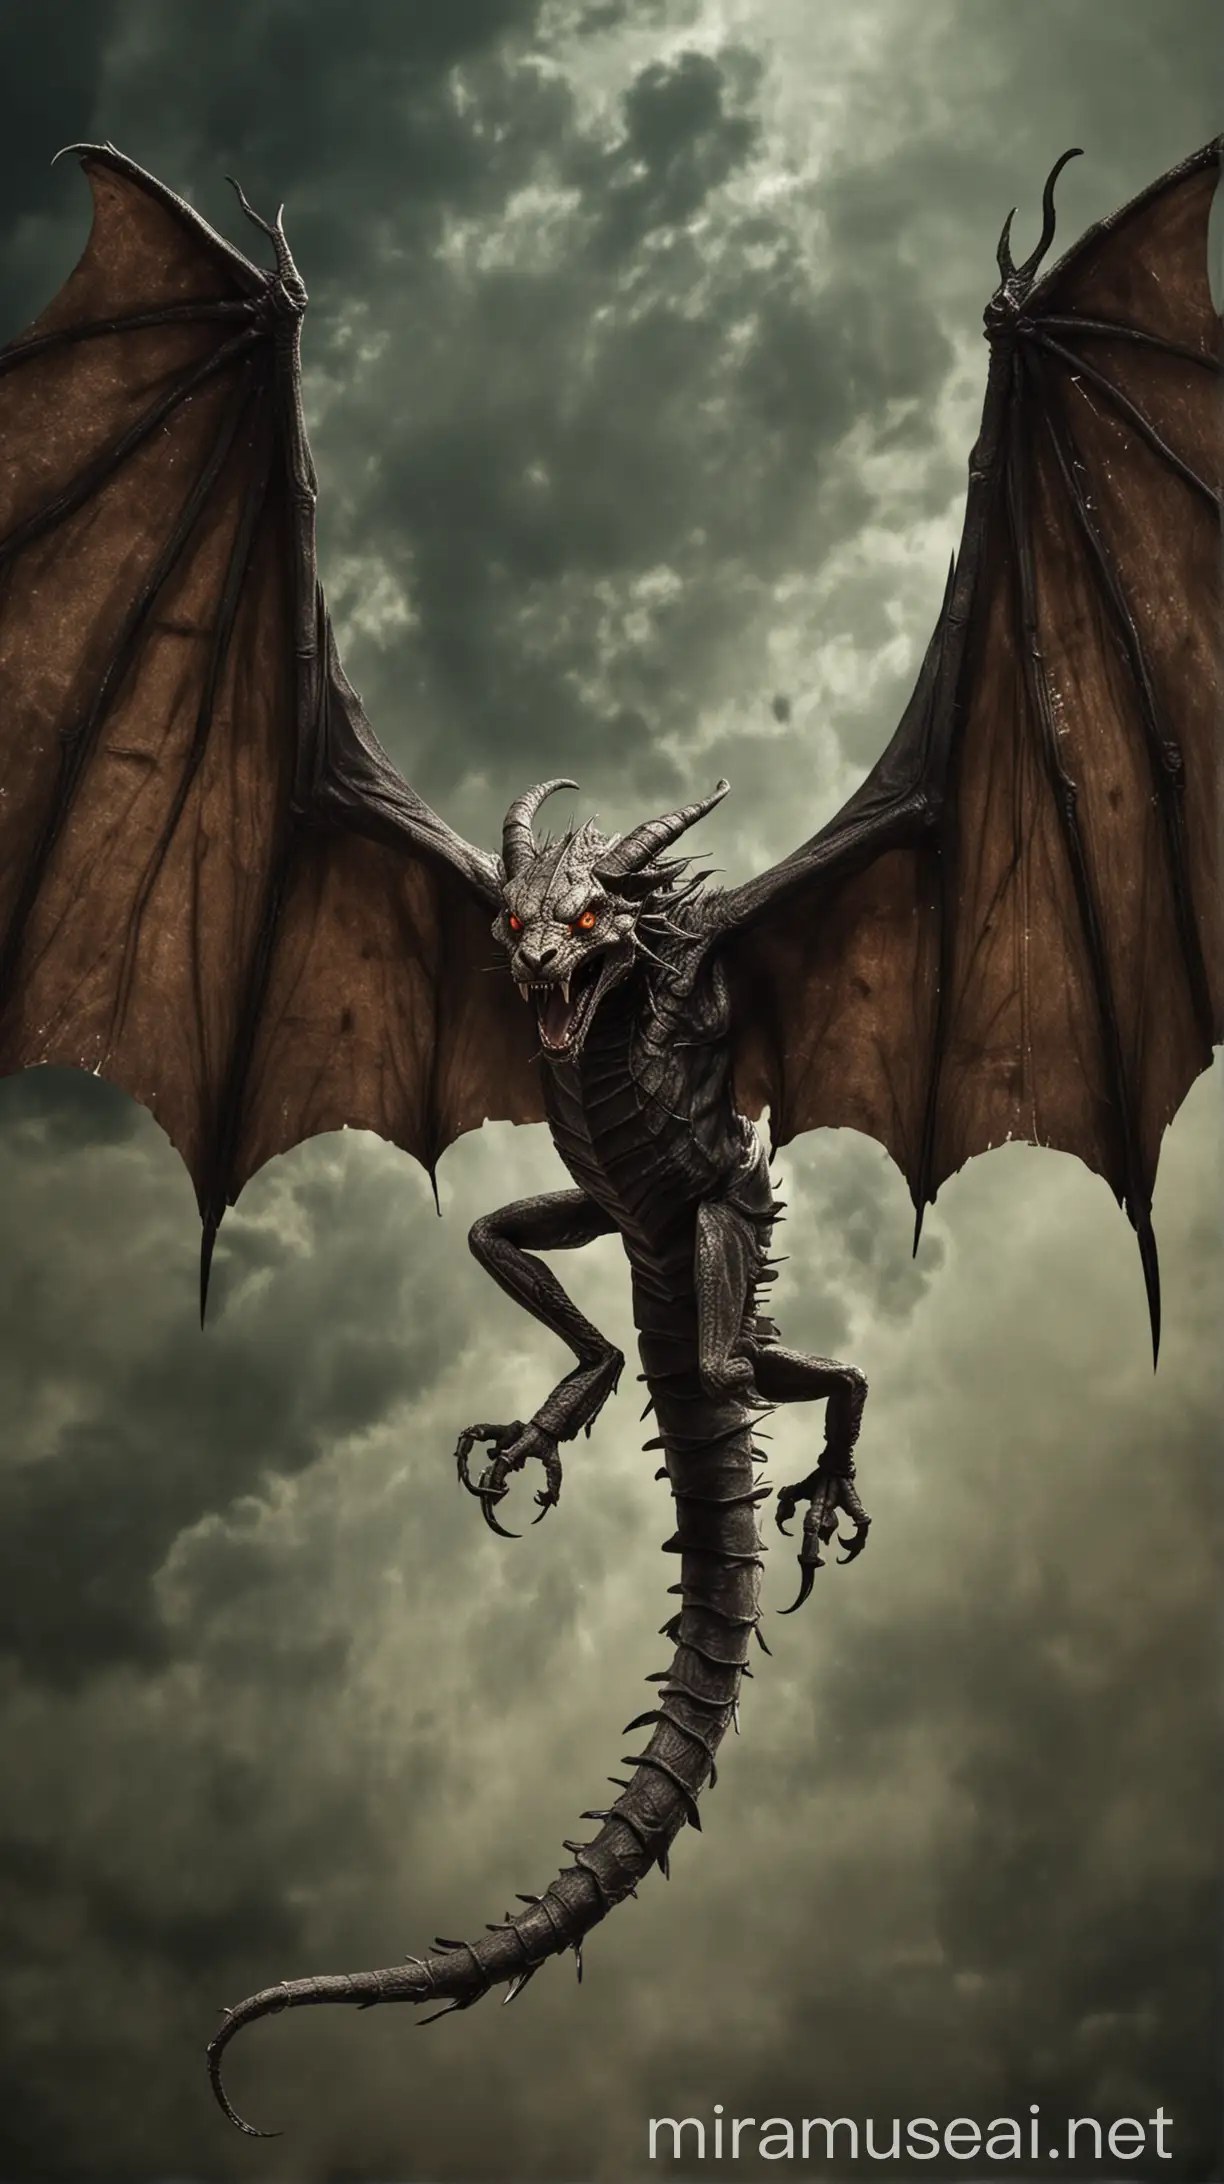 *Name:* Aerochimera
*Appearance:* A winged, serpent-like creature with a lion's head, bat-like wings, and a scorpion's tail. Create the images exactly like the description but make it terrifying 